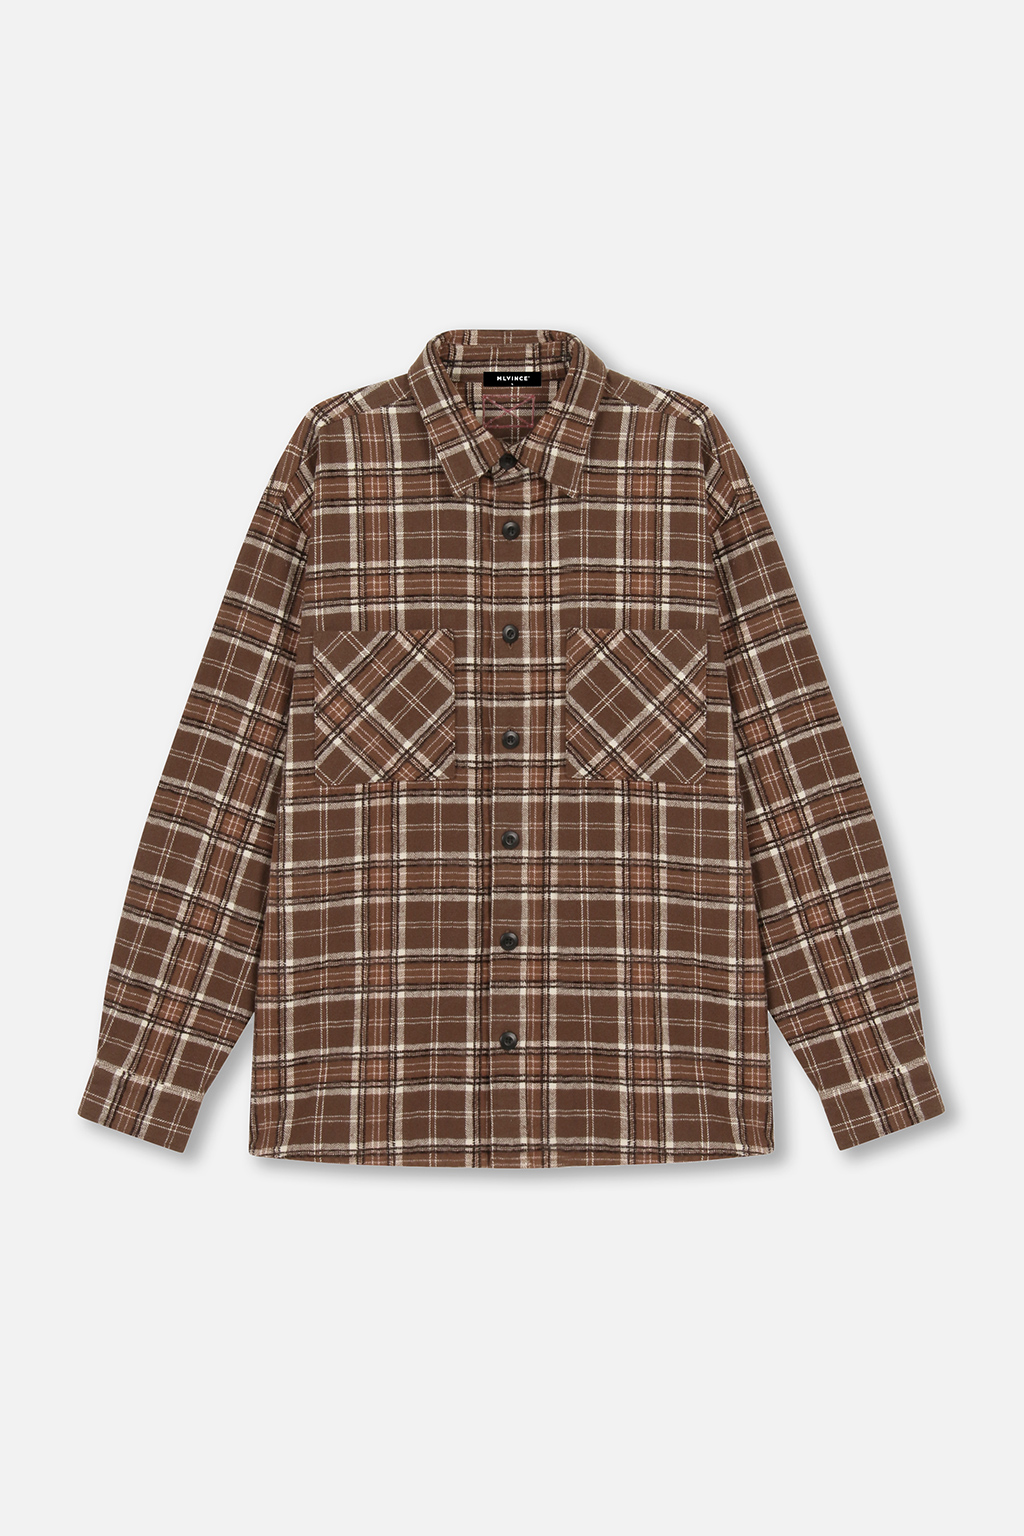 FLANNEL CHECK SHIRT - BROWN